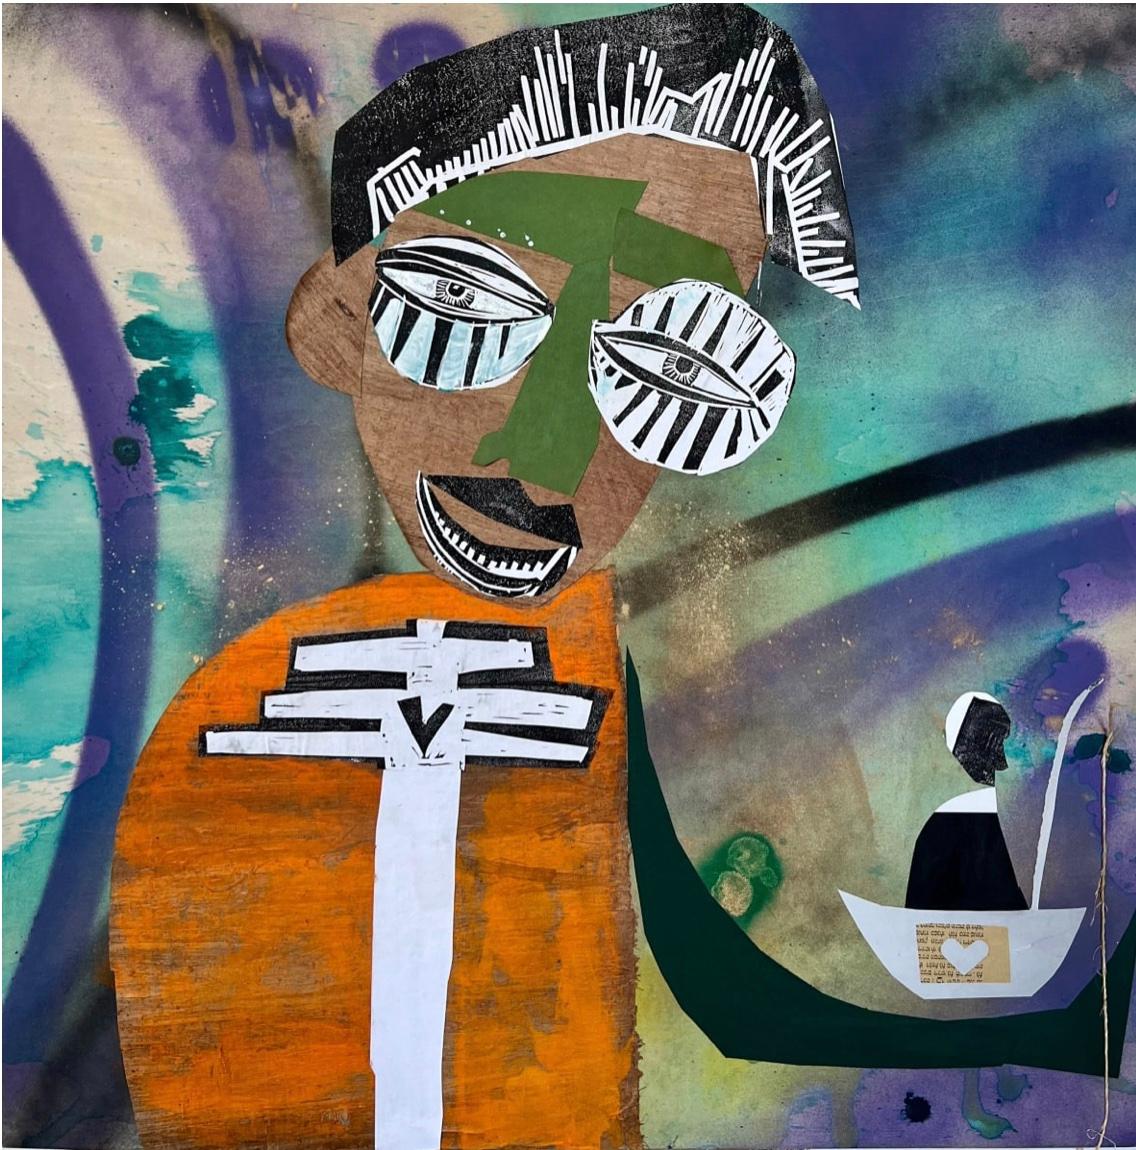 Collage of male figure with orange shirt, against spray paint background, holding a boat with a human figure fishing. Both figures have a small heart on them. 

Unique one of a kind work signed by the artist. 

ARTIST BIO 
Alice Mizrachi is a New